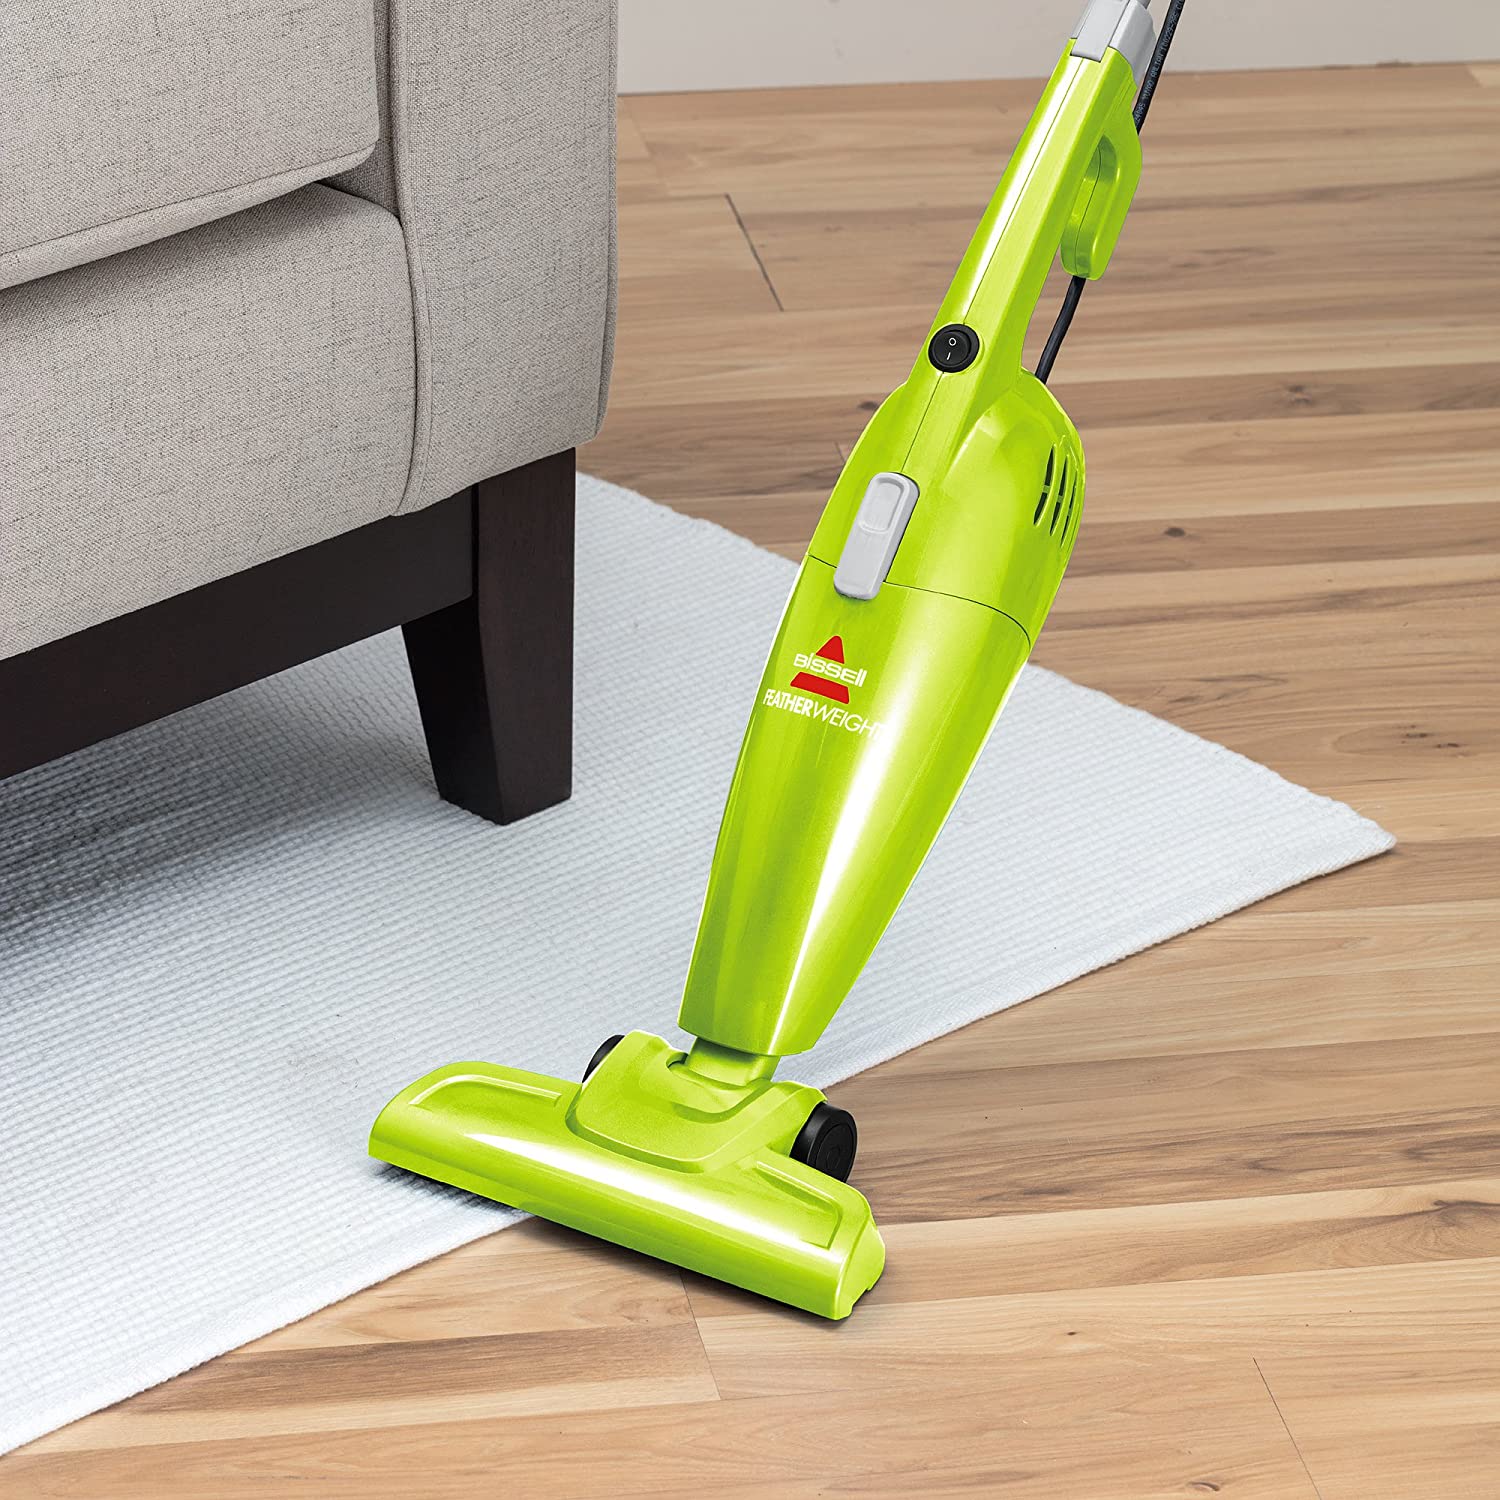 Best vacuum for carpet and tile. The best vacuum cleaners money can buy